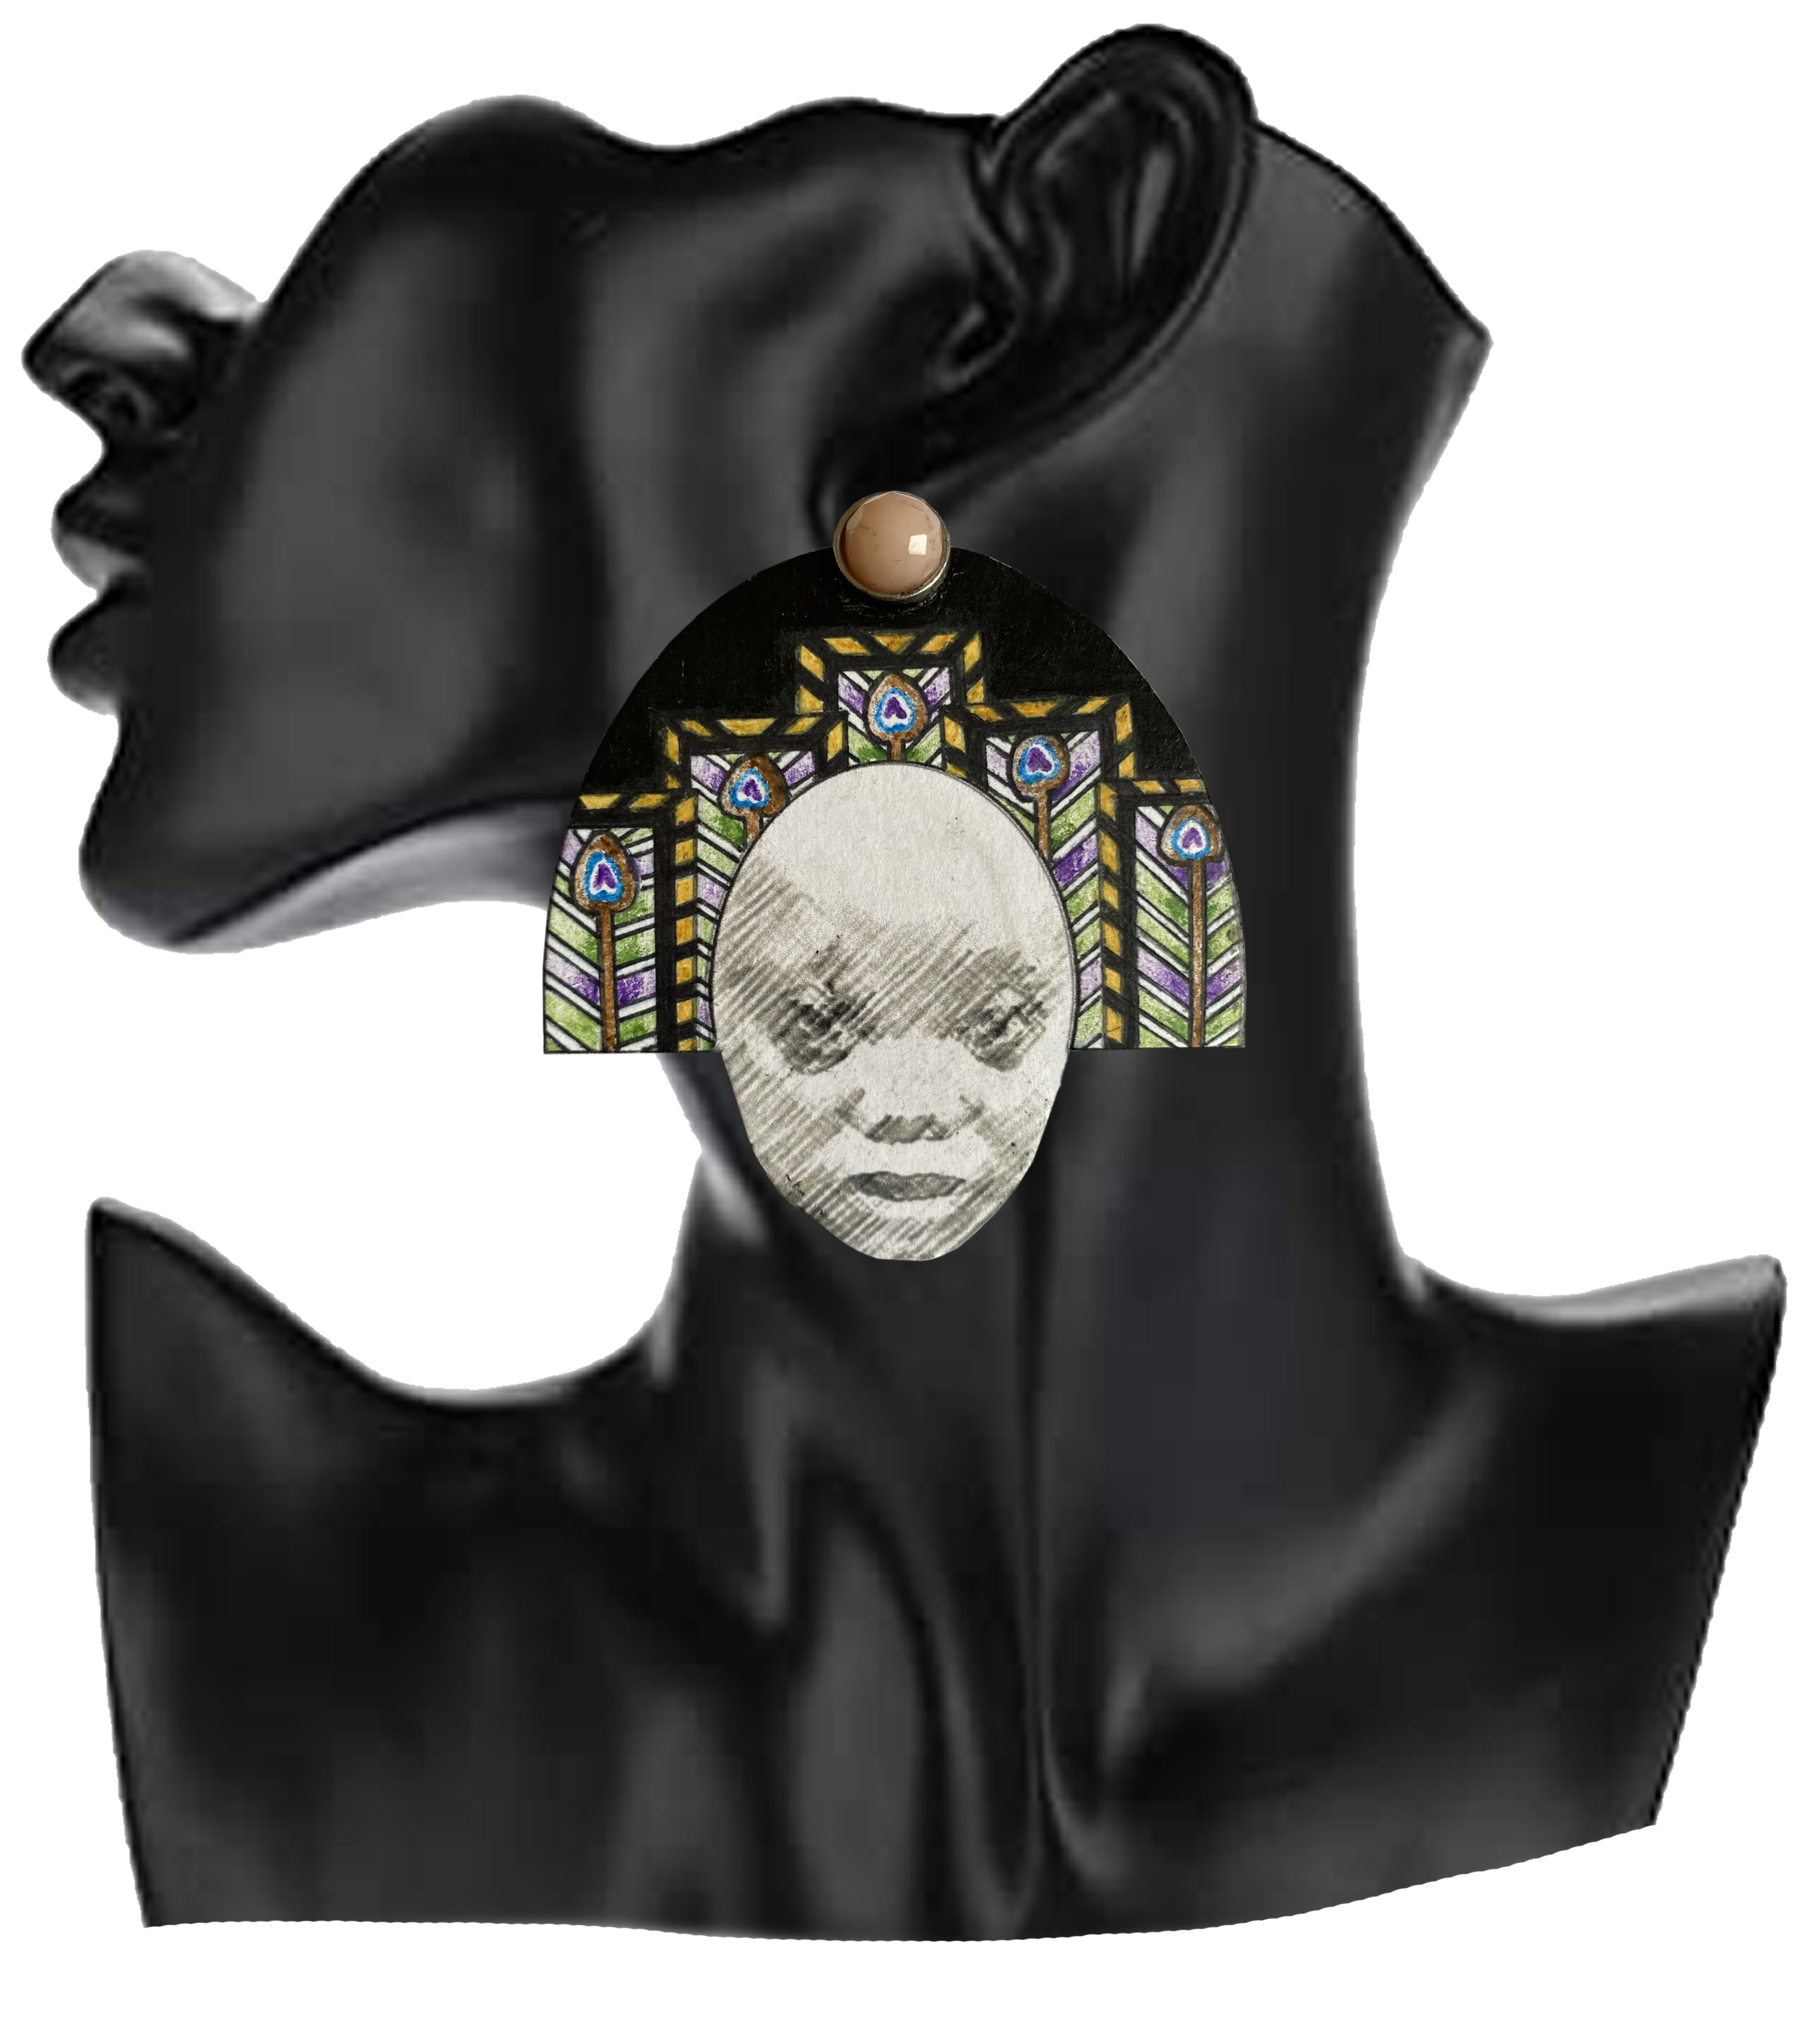 Hereni Nasara 2 (inspired by Nasara, one of the wives of Avenge with typical fan-shaped style of the Zande Democratic Republic of Congo)